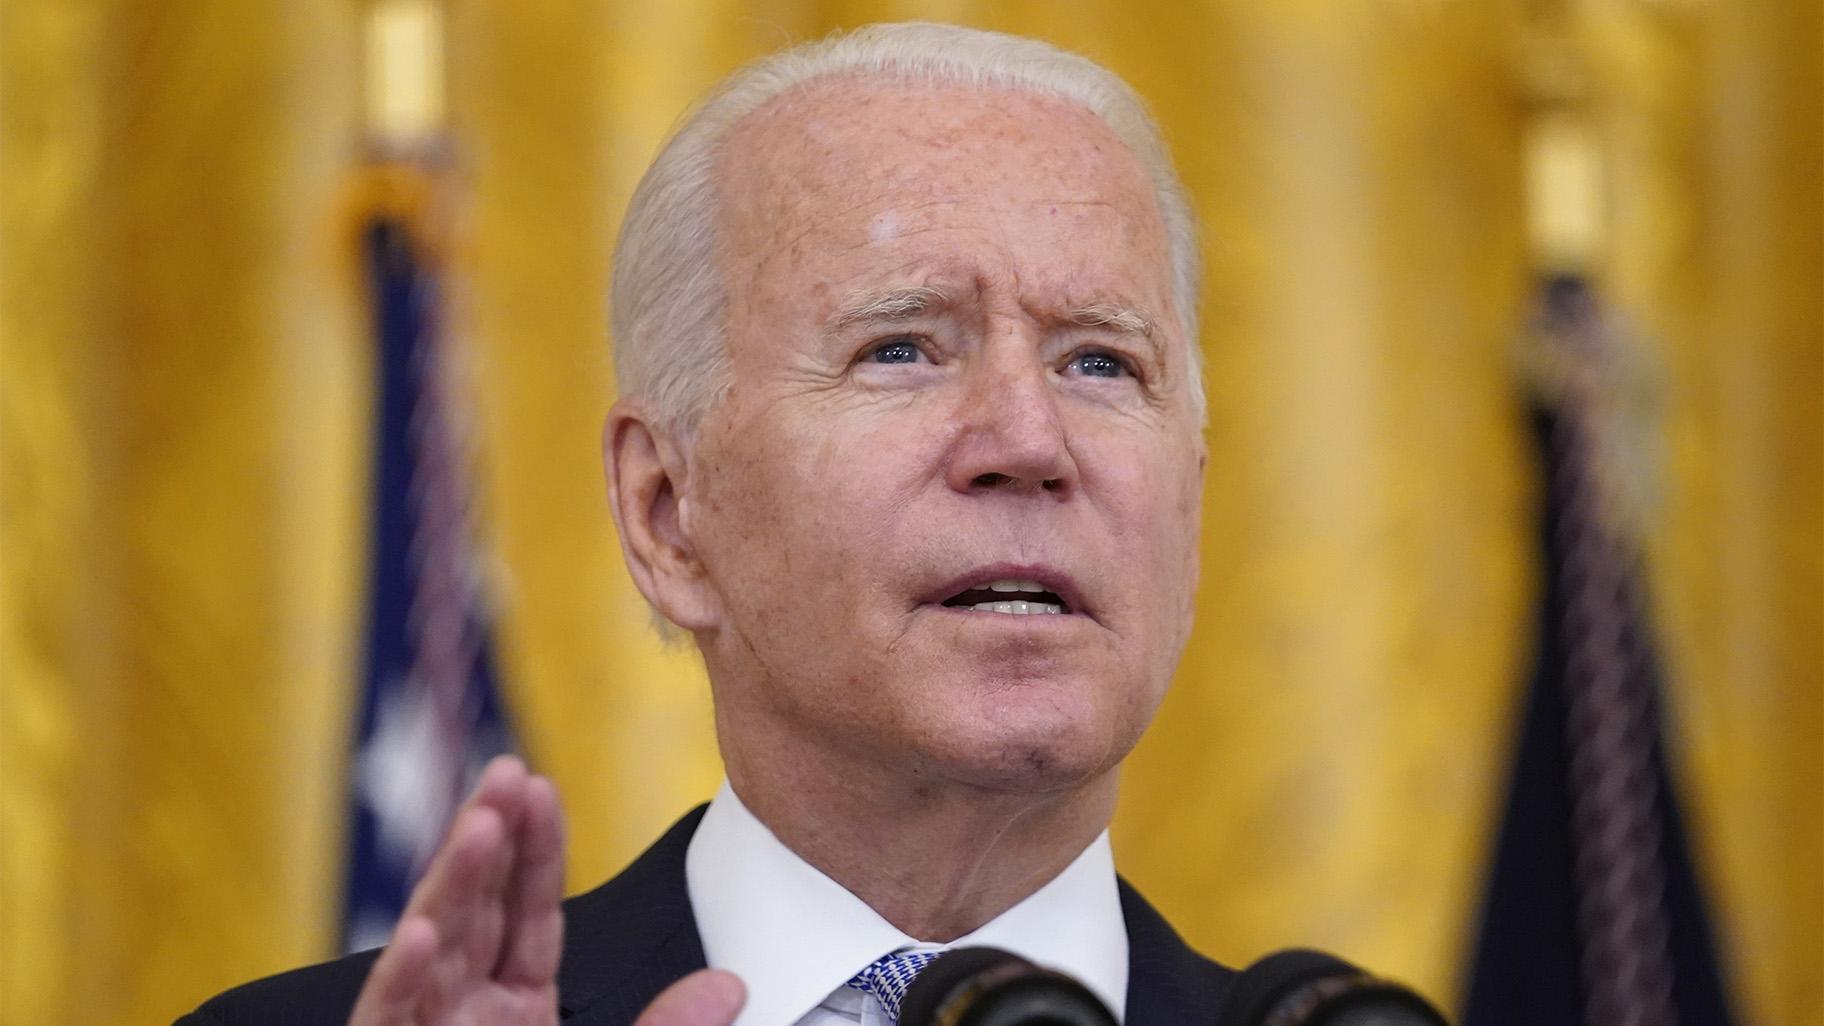 President Joe Biden speaks about COVID-19 vaccine requirements for federal workers in the East Room of the White House in Washington, Thursday, July 29, 2021. (AP Photo / Susan Walsh)